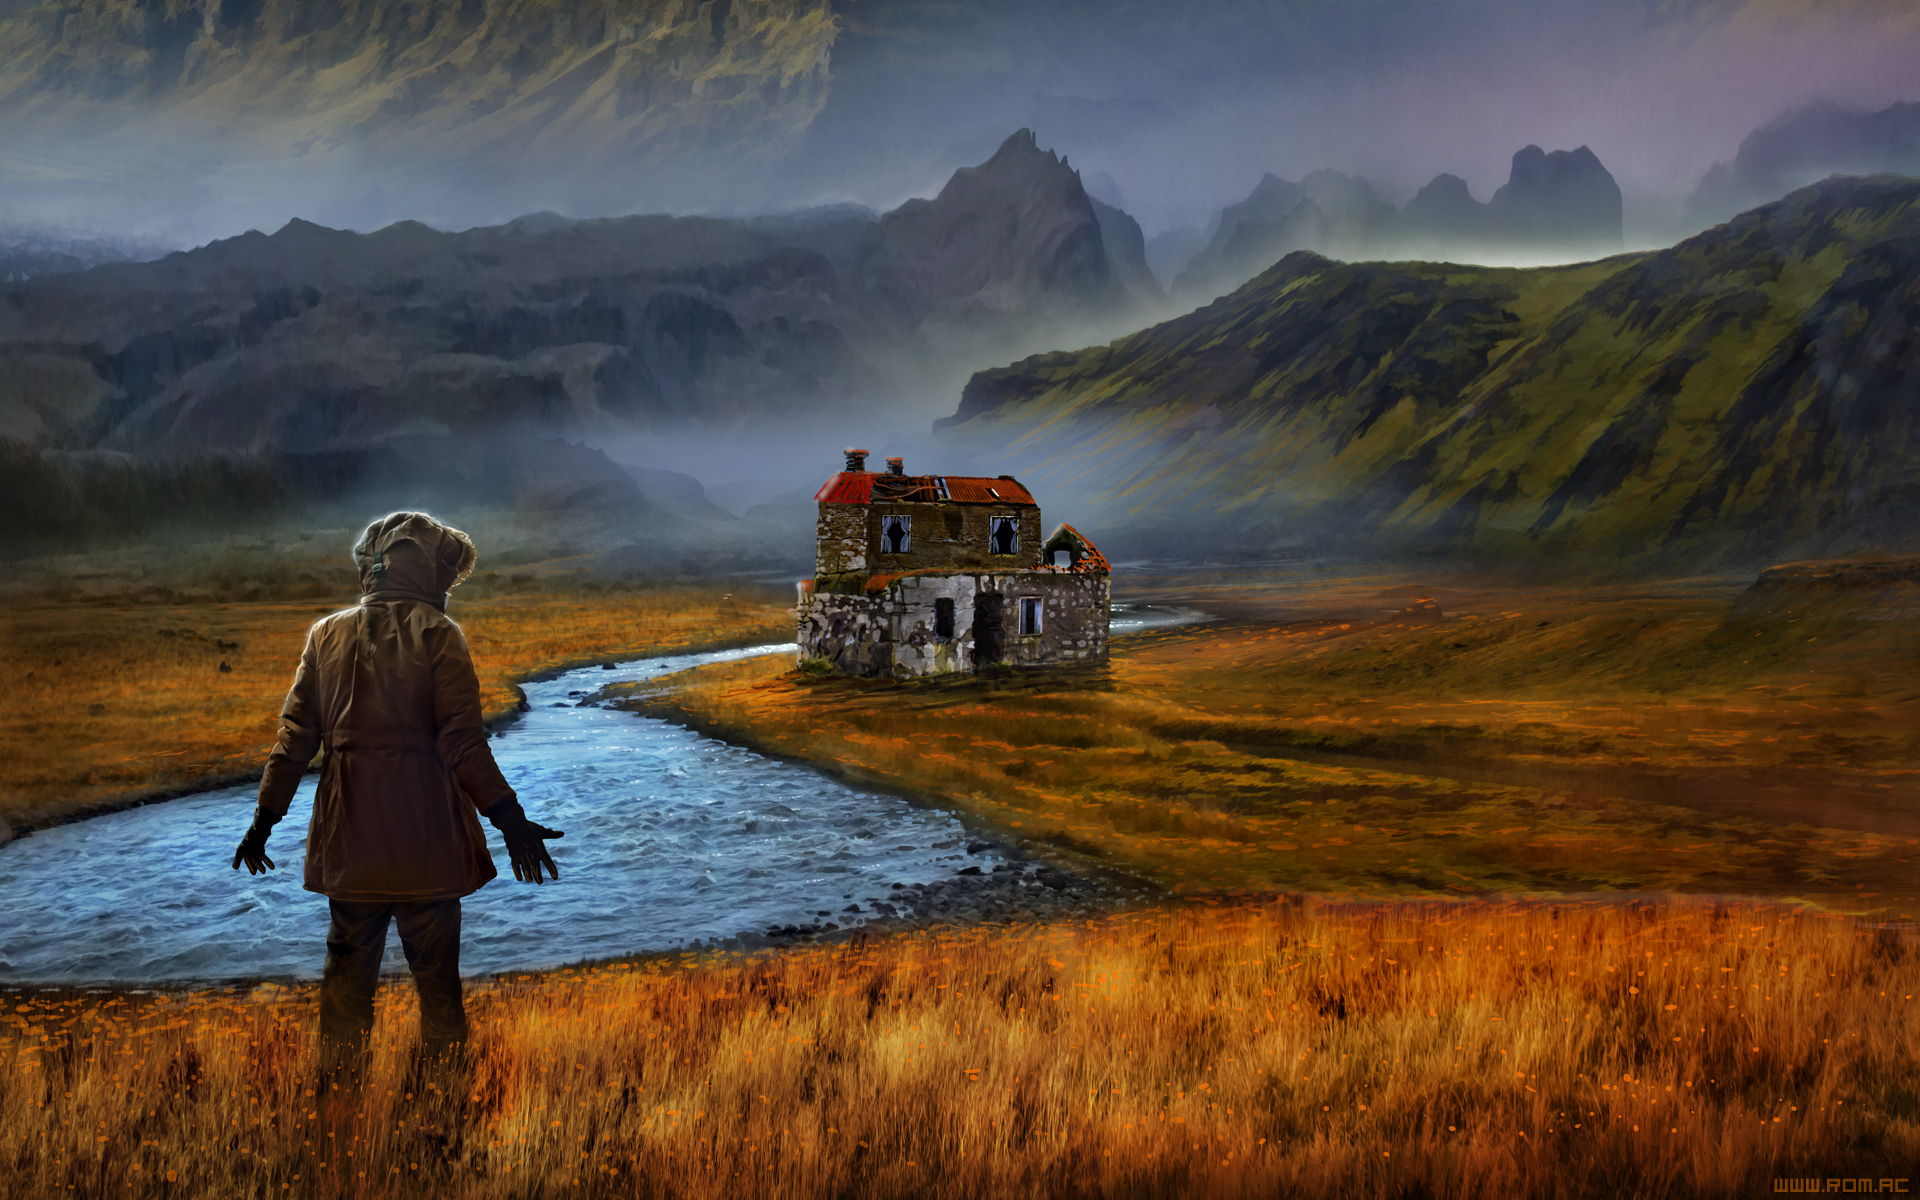 General 1920x1200 Romantically Apocalyptic digital art apocalyptic nature landscape mountains field mist stream house